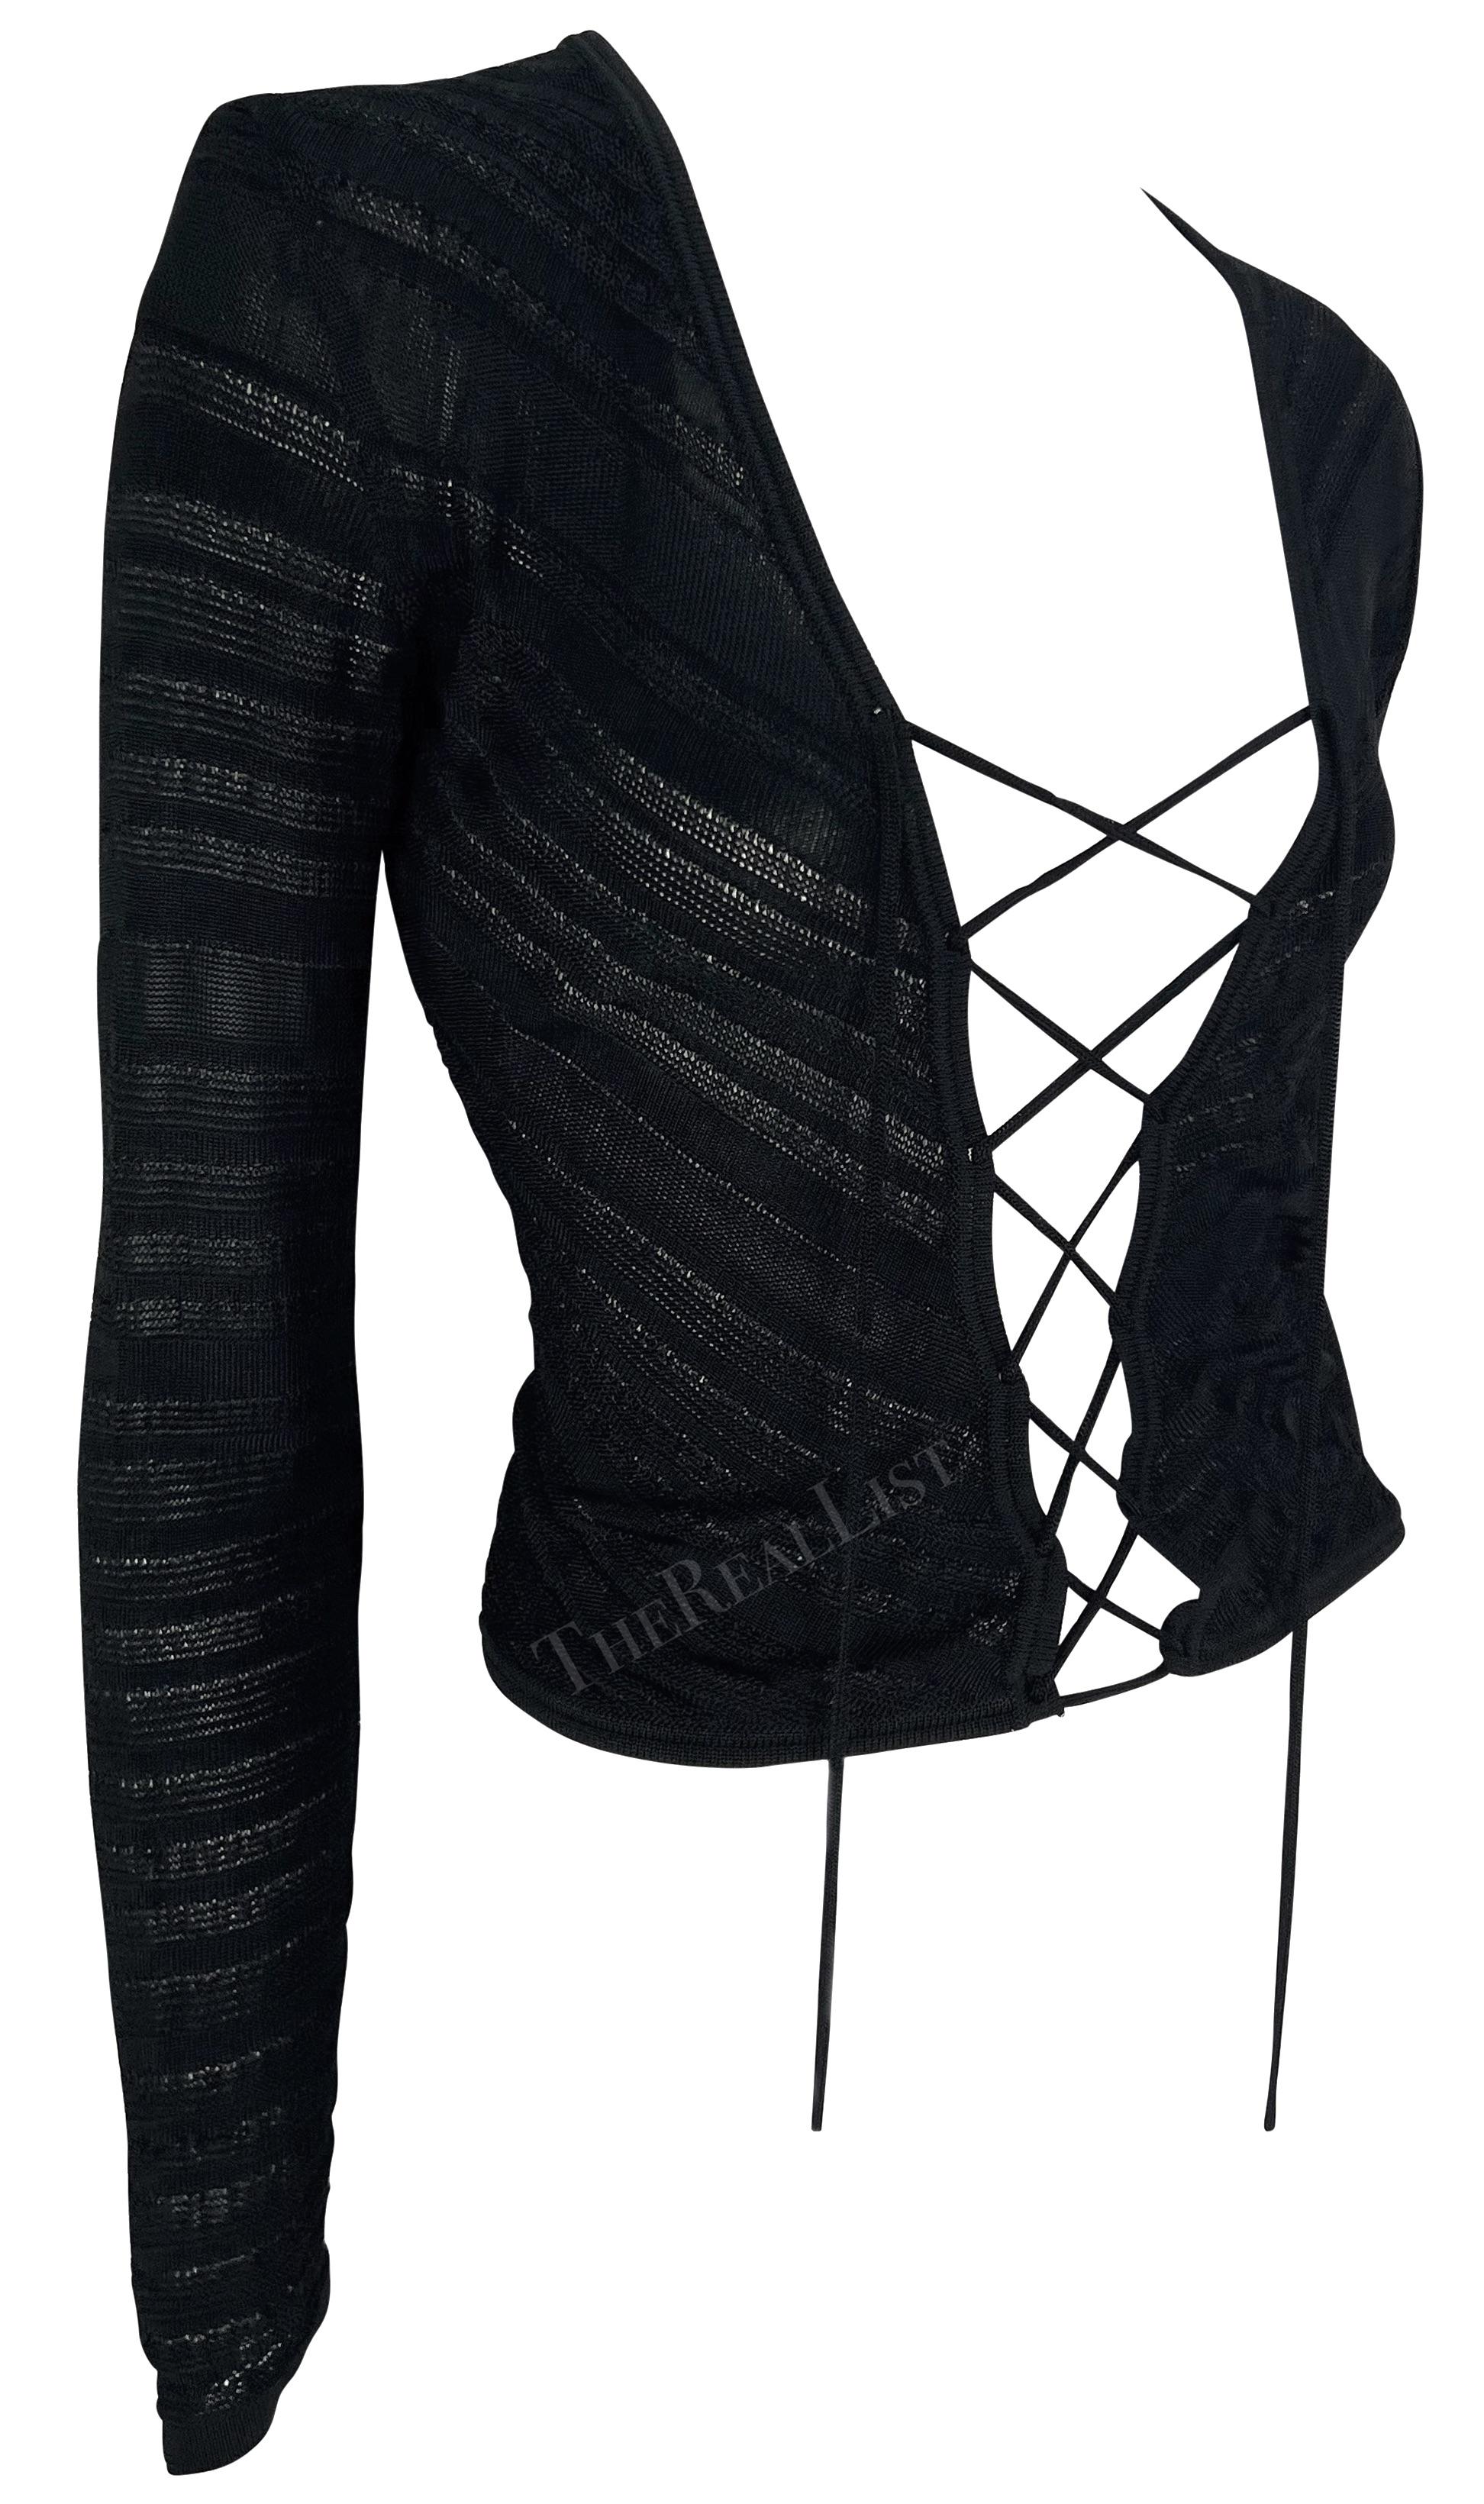 This fabulous black knit Gianni Versace cardigan was designed by Donatella Versace. From the Spring/Summer 2002 collection, this lightweight knit sweater is semi-sheer and features a lace-up closure at the front. Add this perfectly sexy Gianni